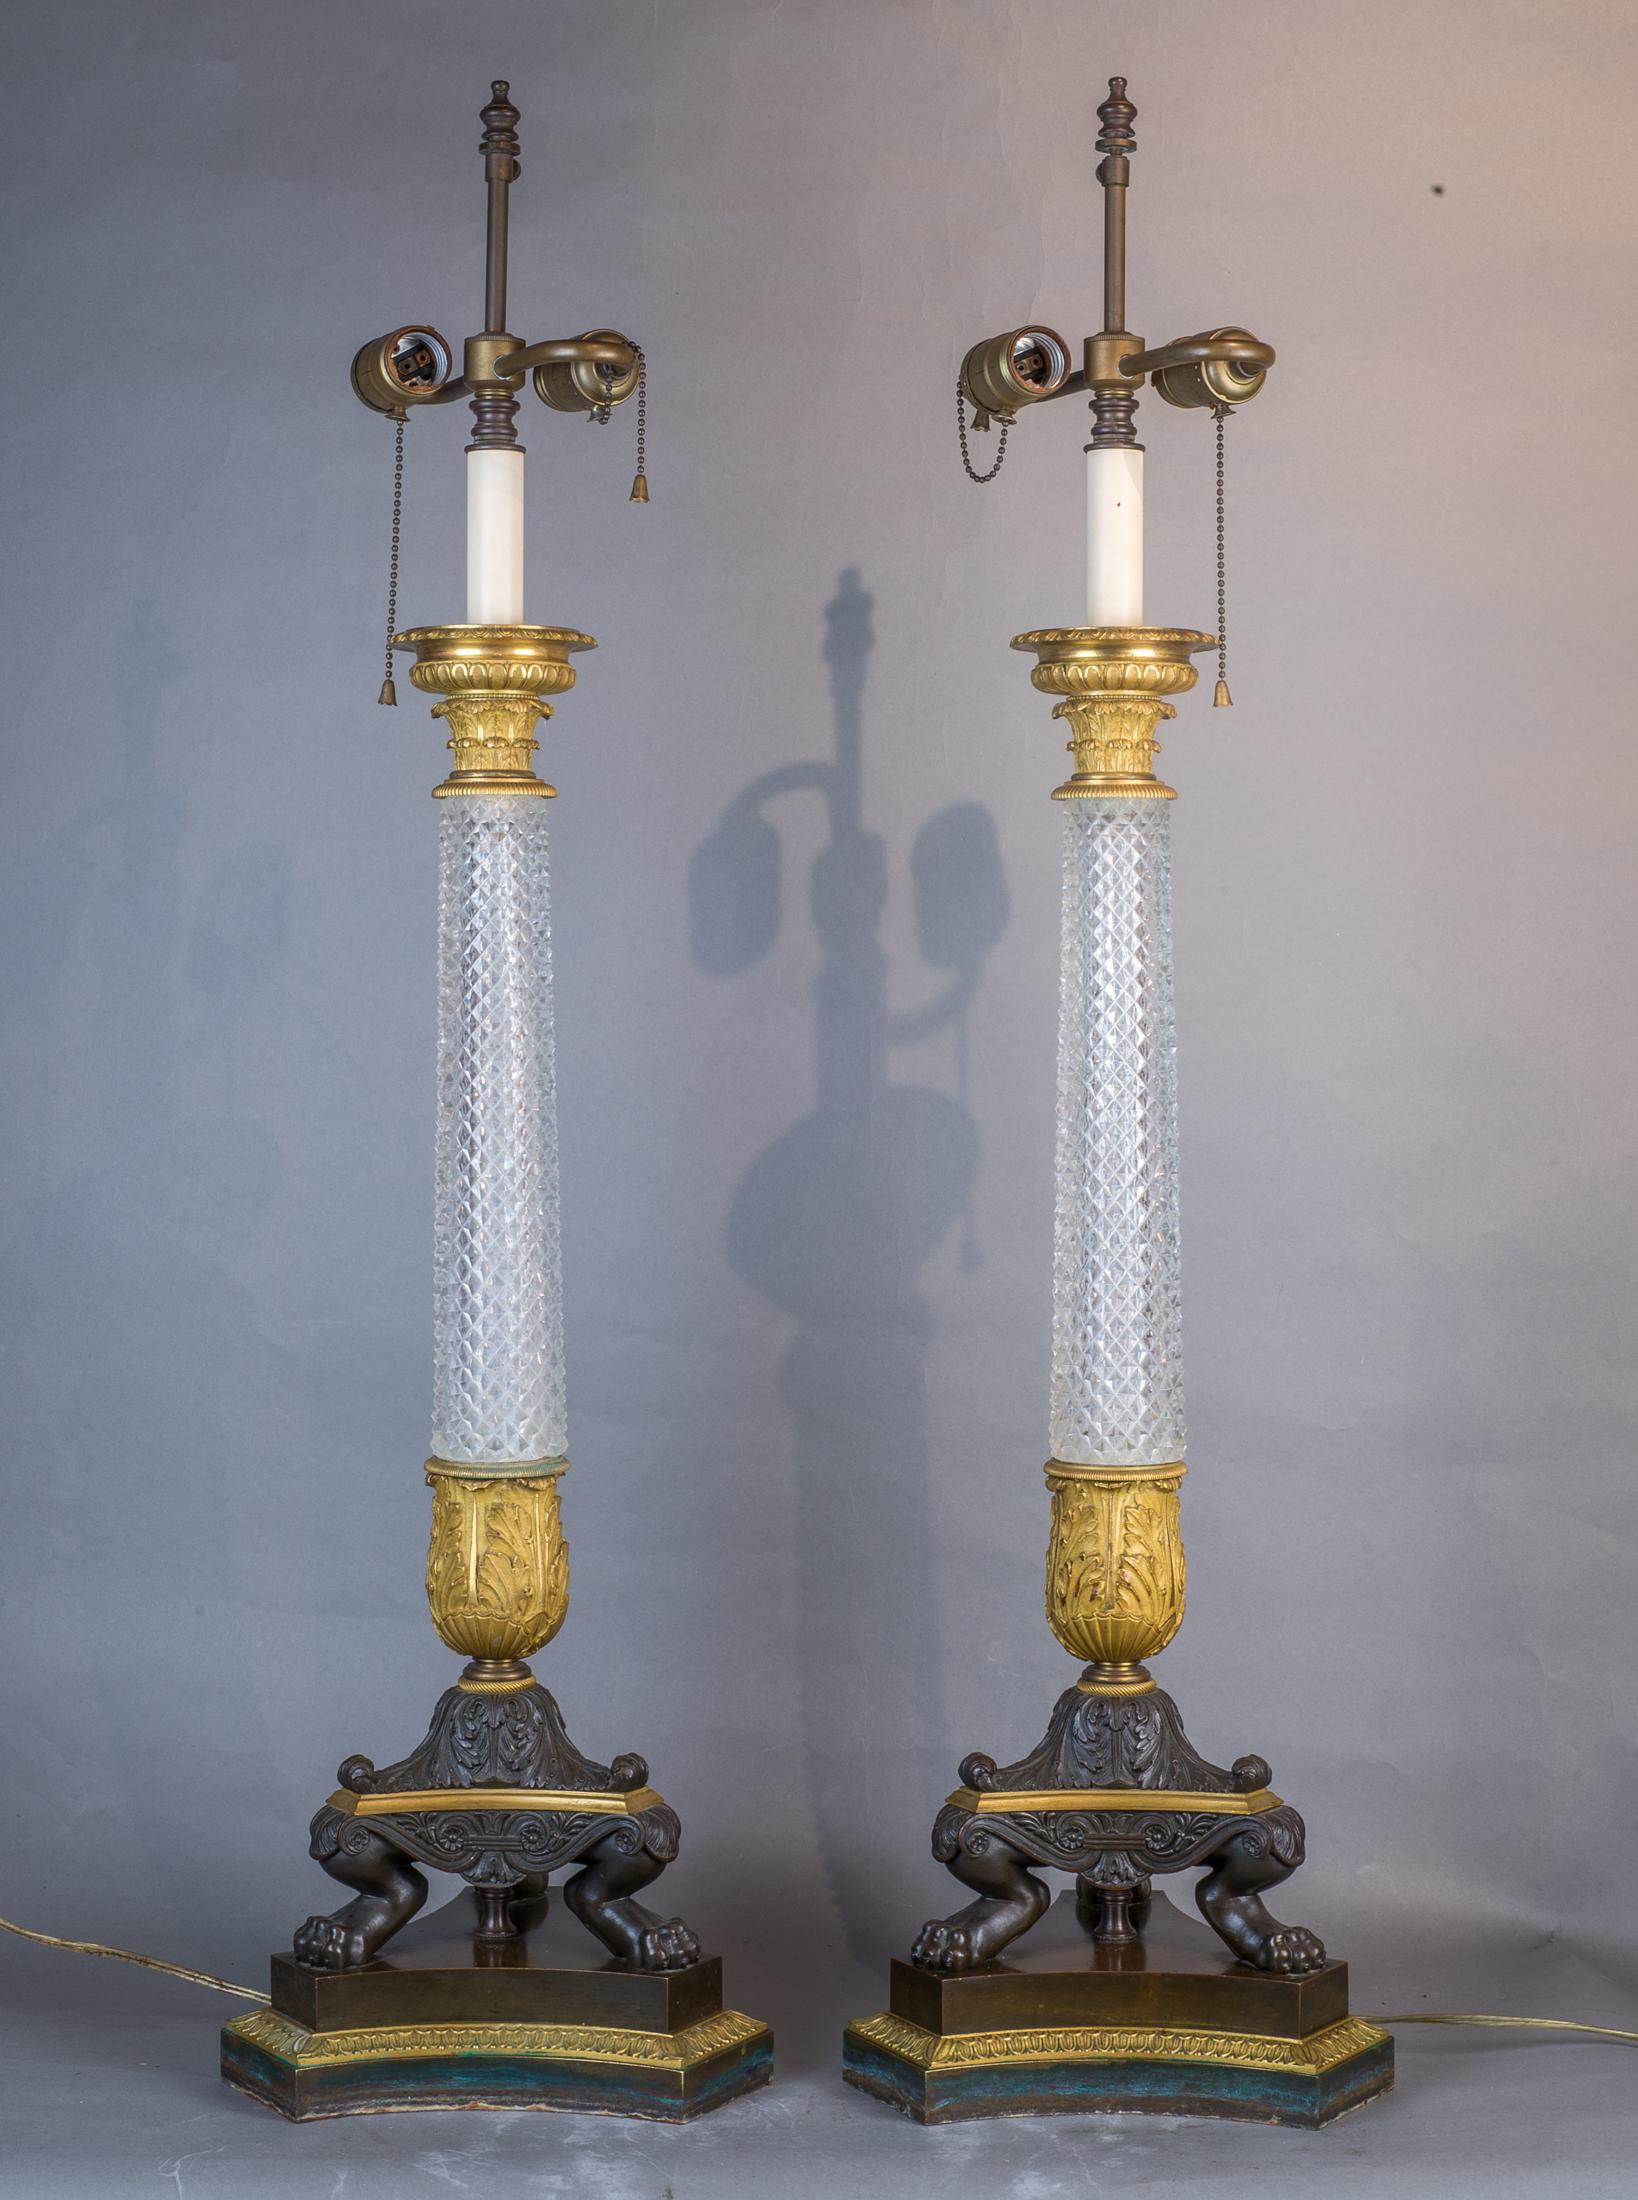 The fine diamond cut crystal column-form table lamps supported by gilt bronze paw feet.

Date: Early 19th century
Origin: French
Dimension: 36 in x 10 in.